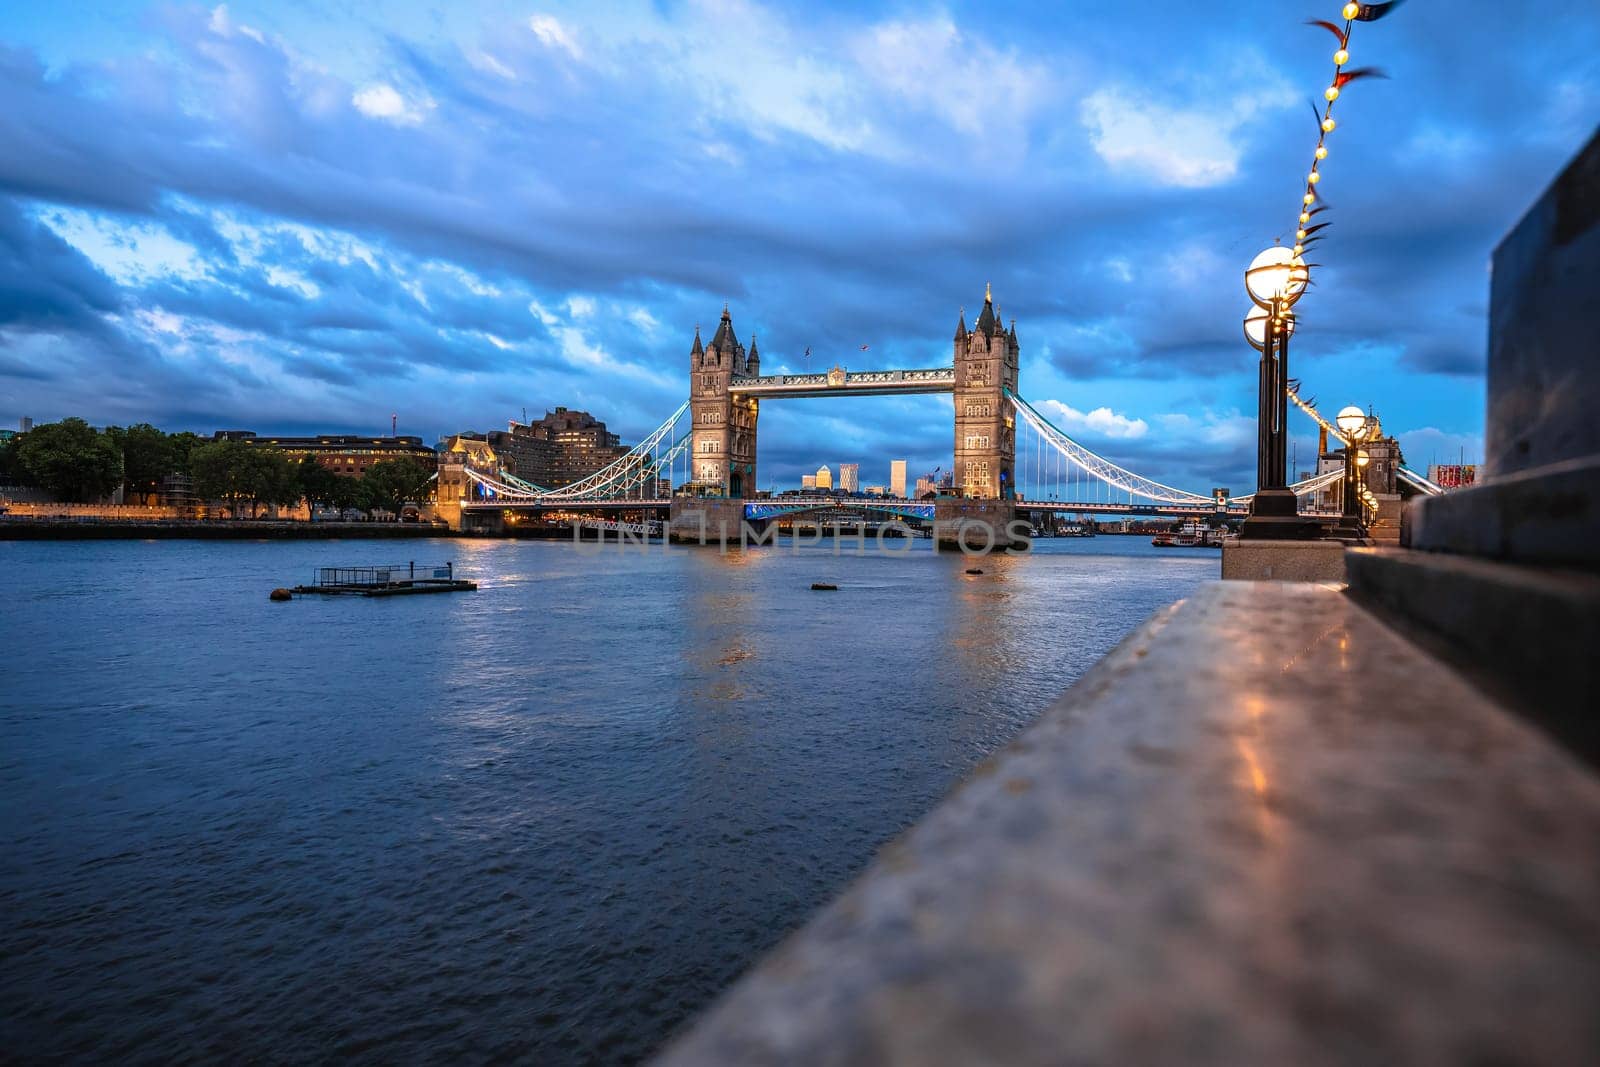 Tower bridge and Thames river in London evening view by xbrchx